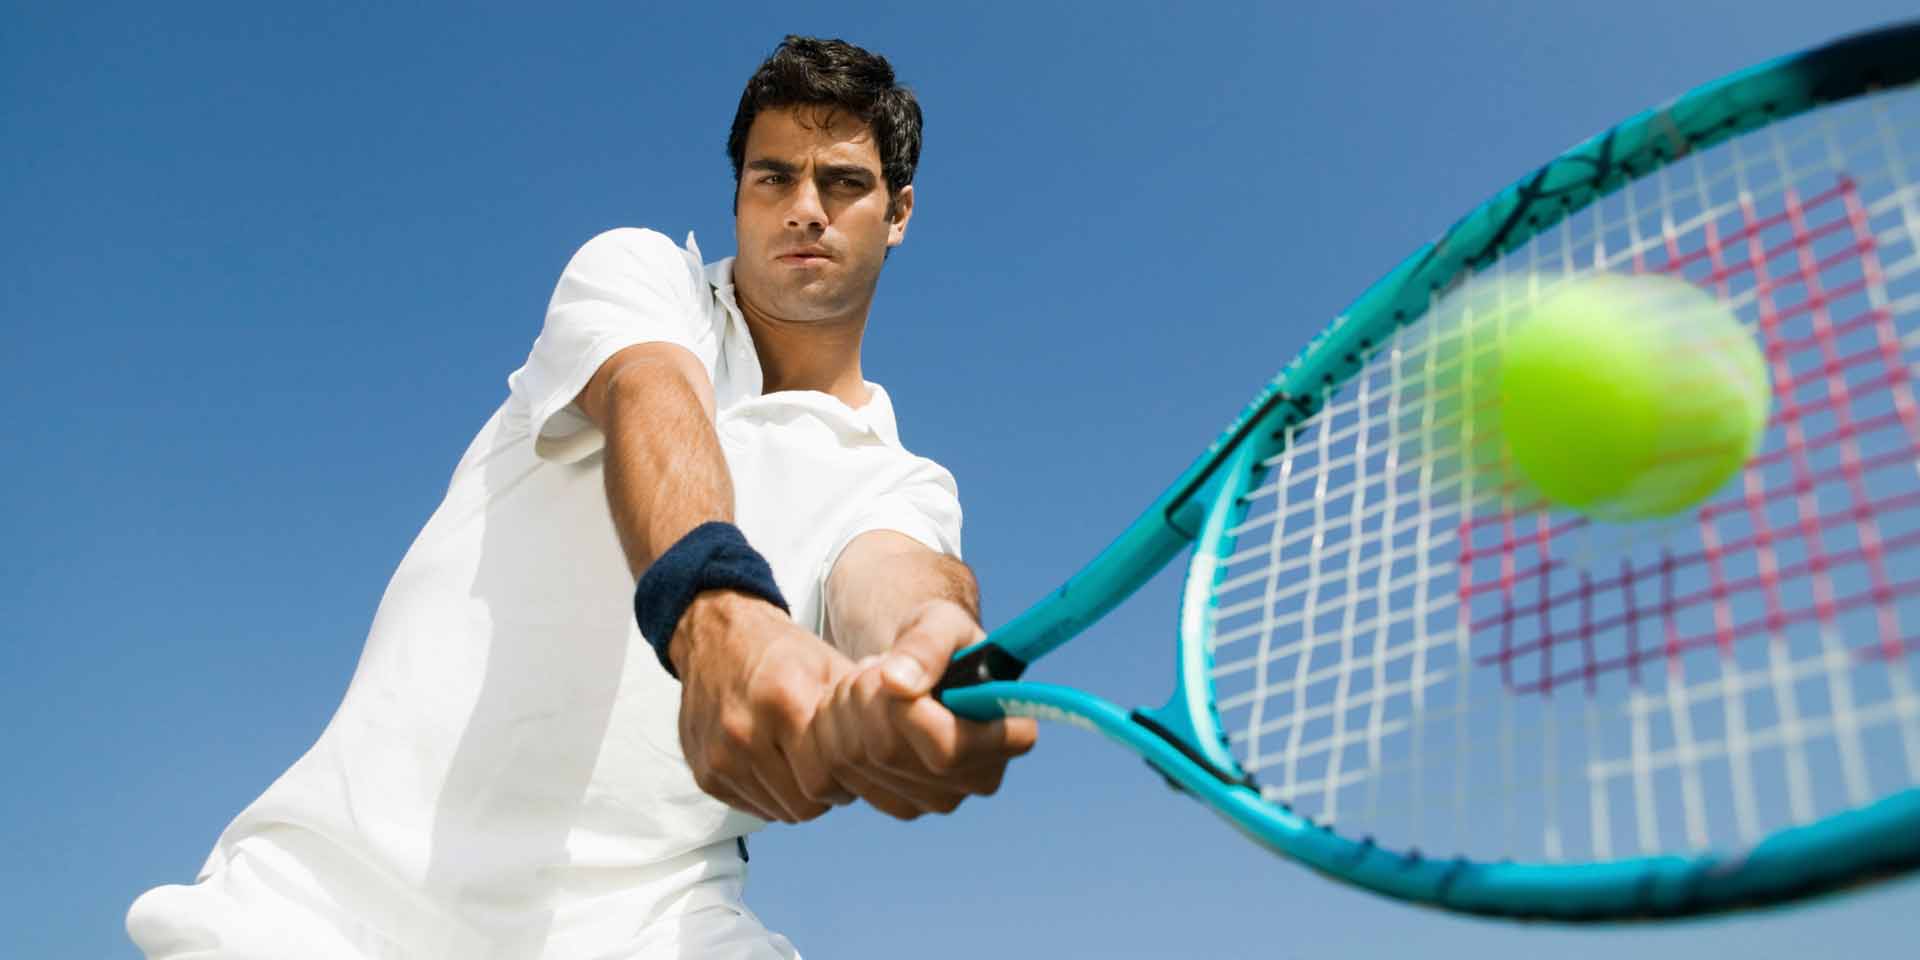 Tips for How to Hold a Tennis Racket